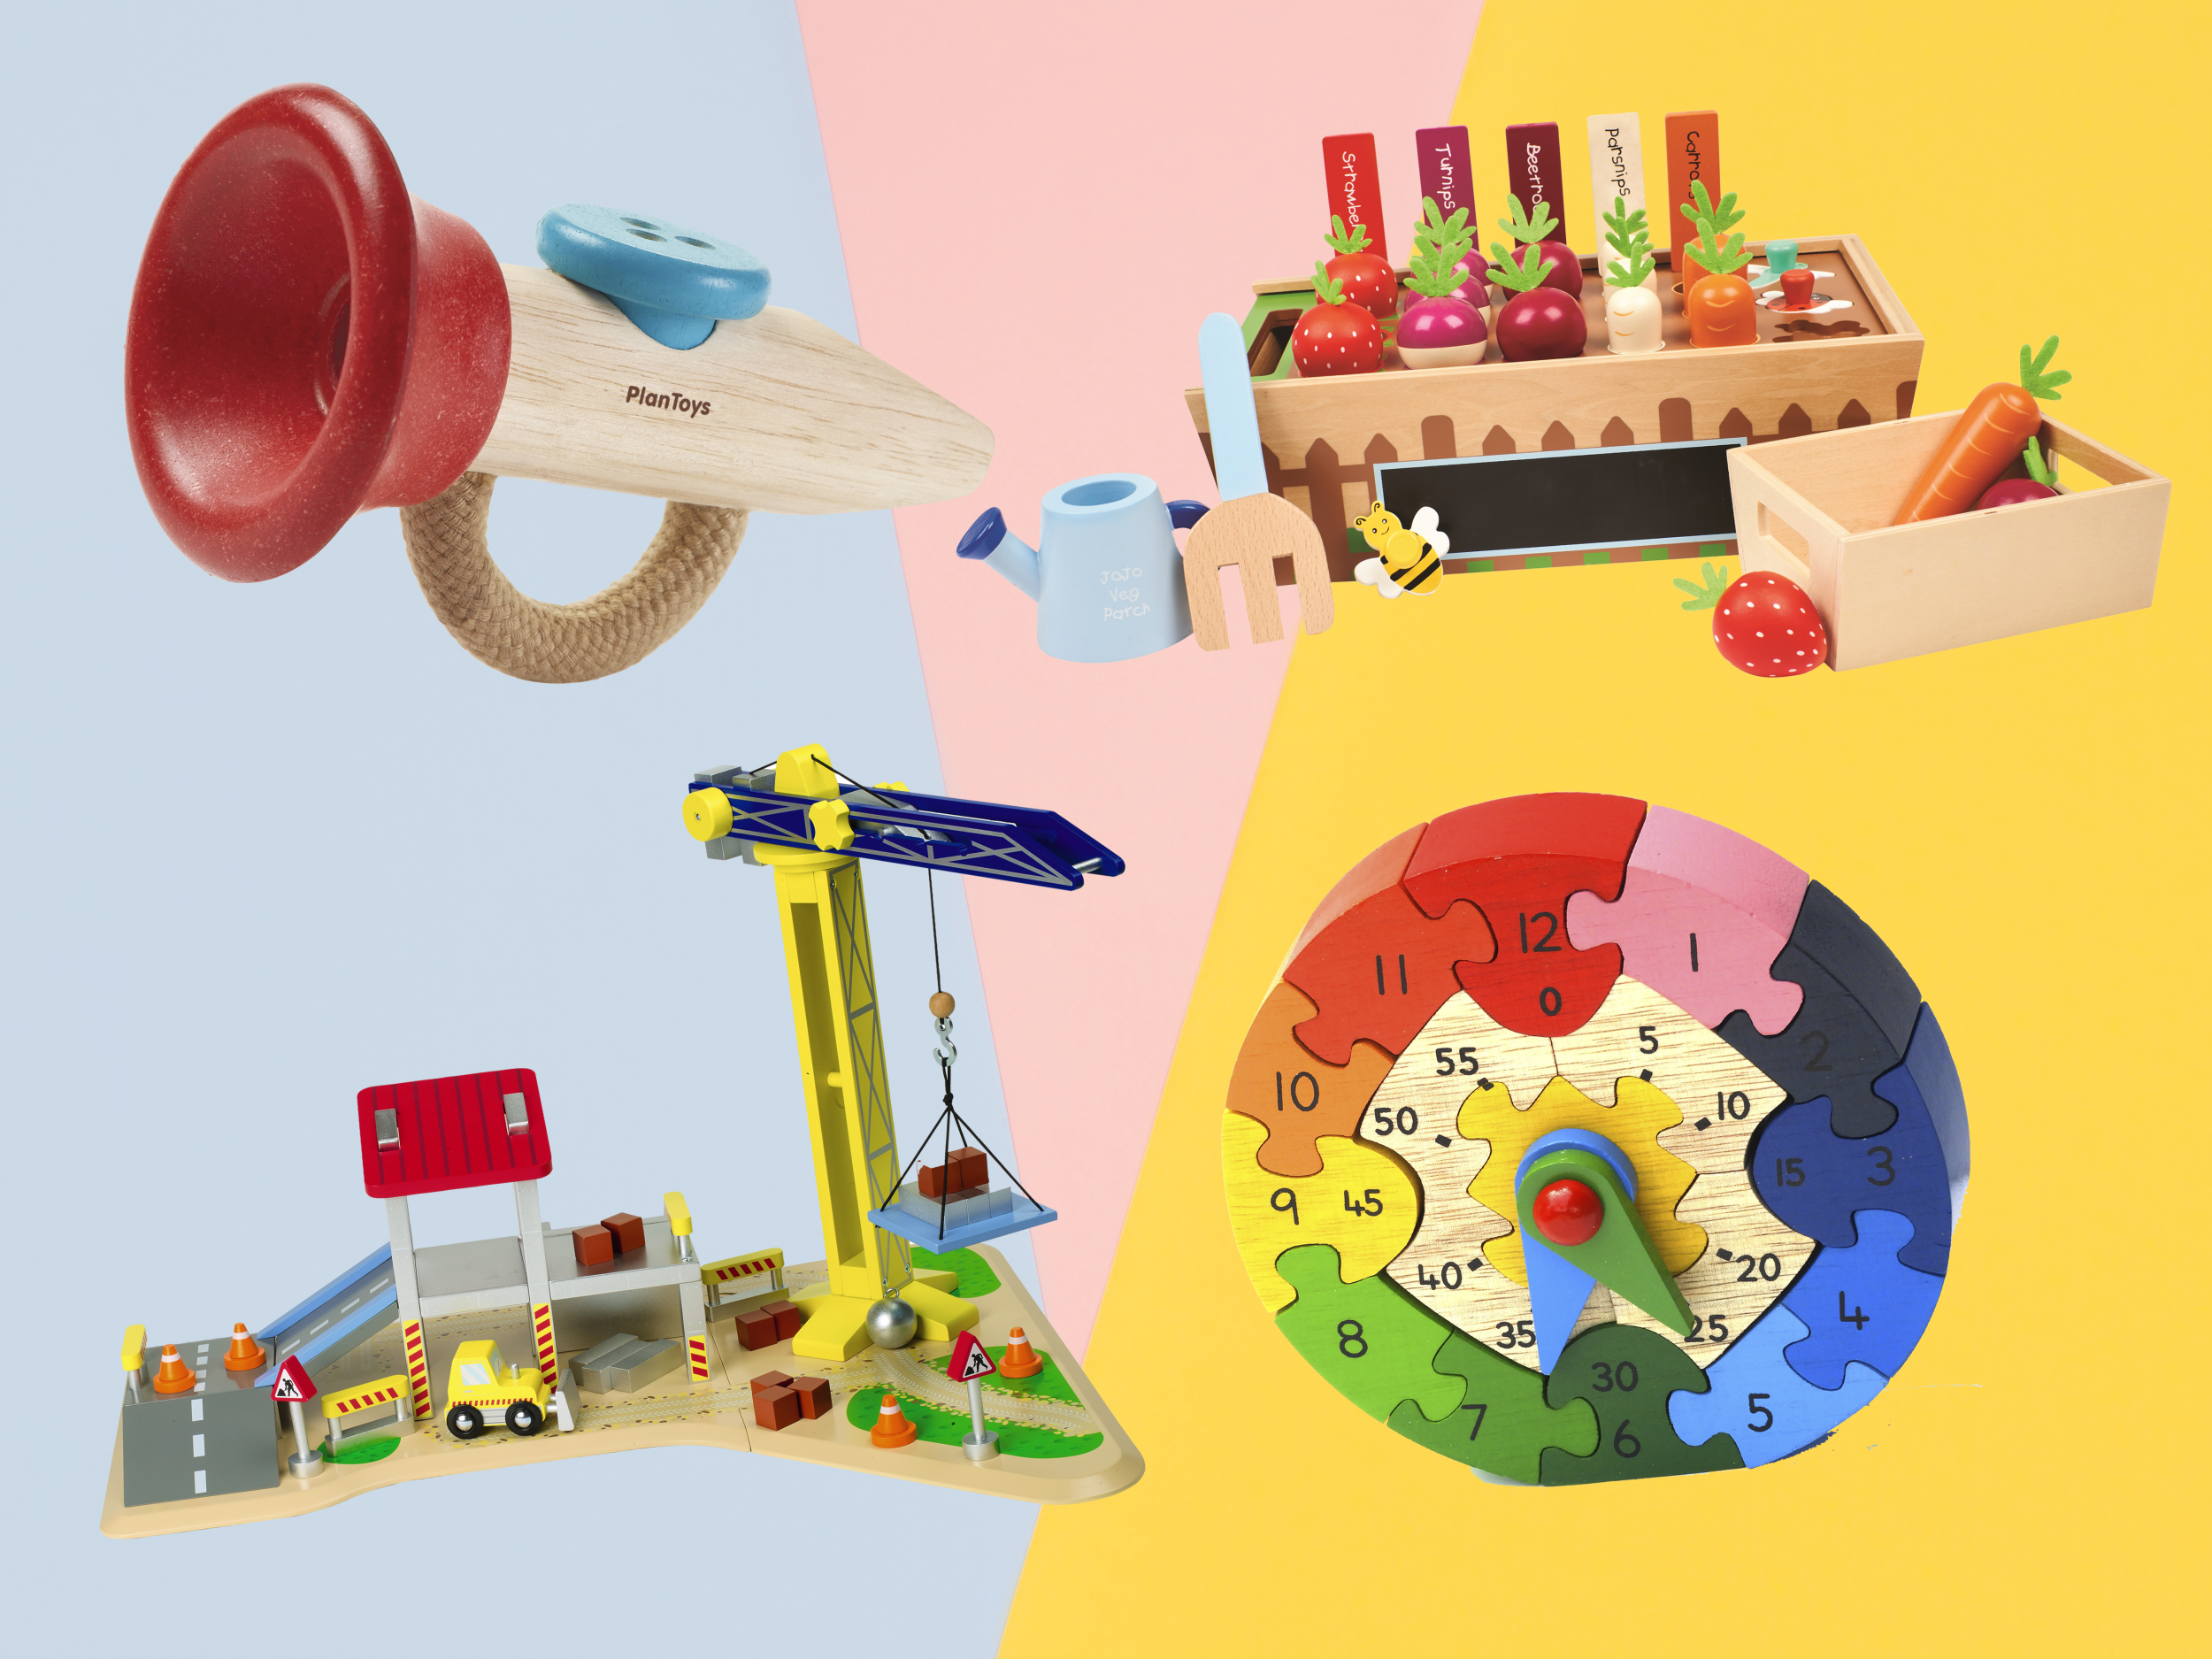 natural toys for toddlers